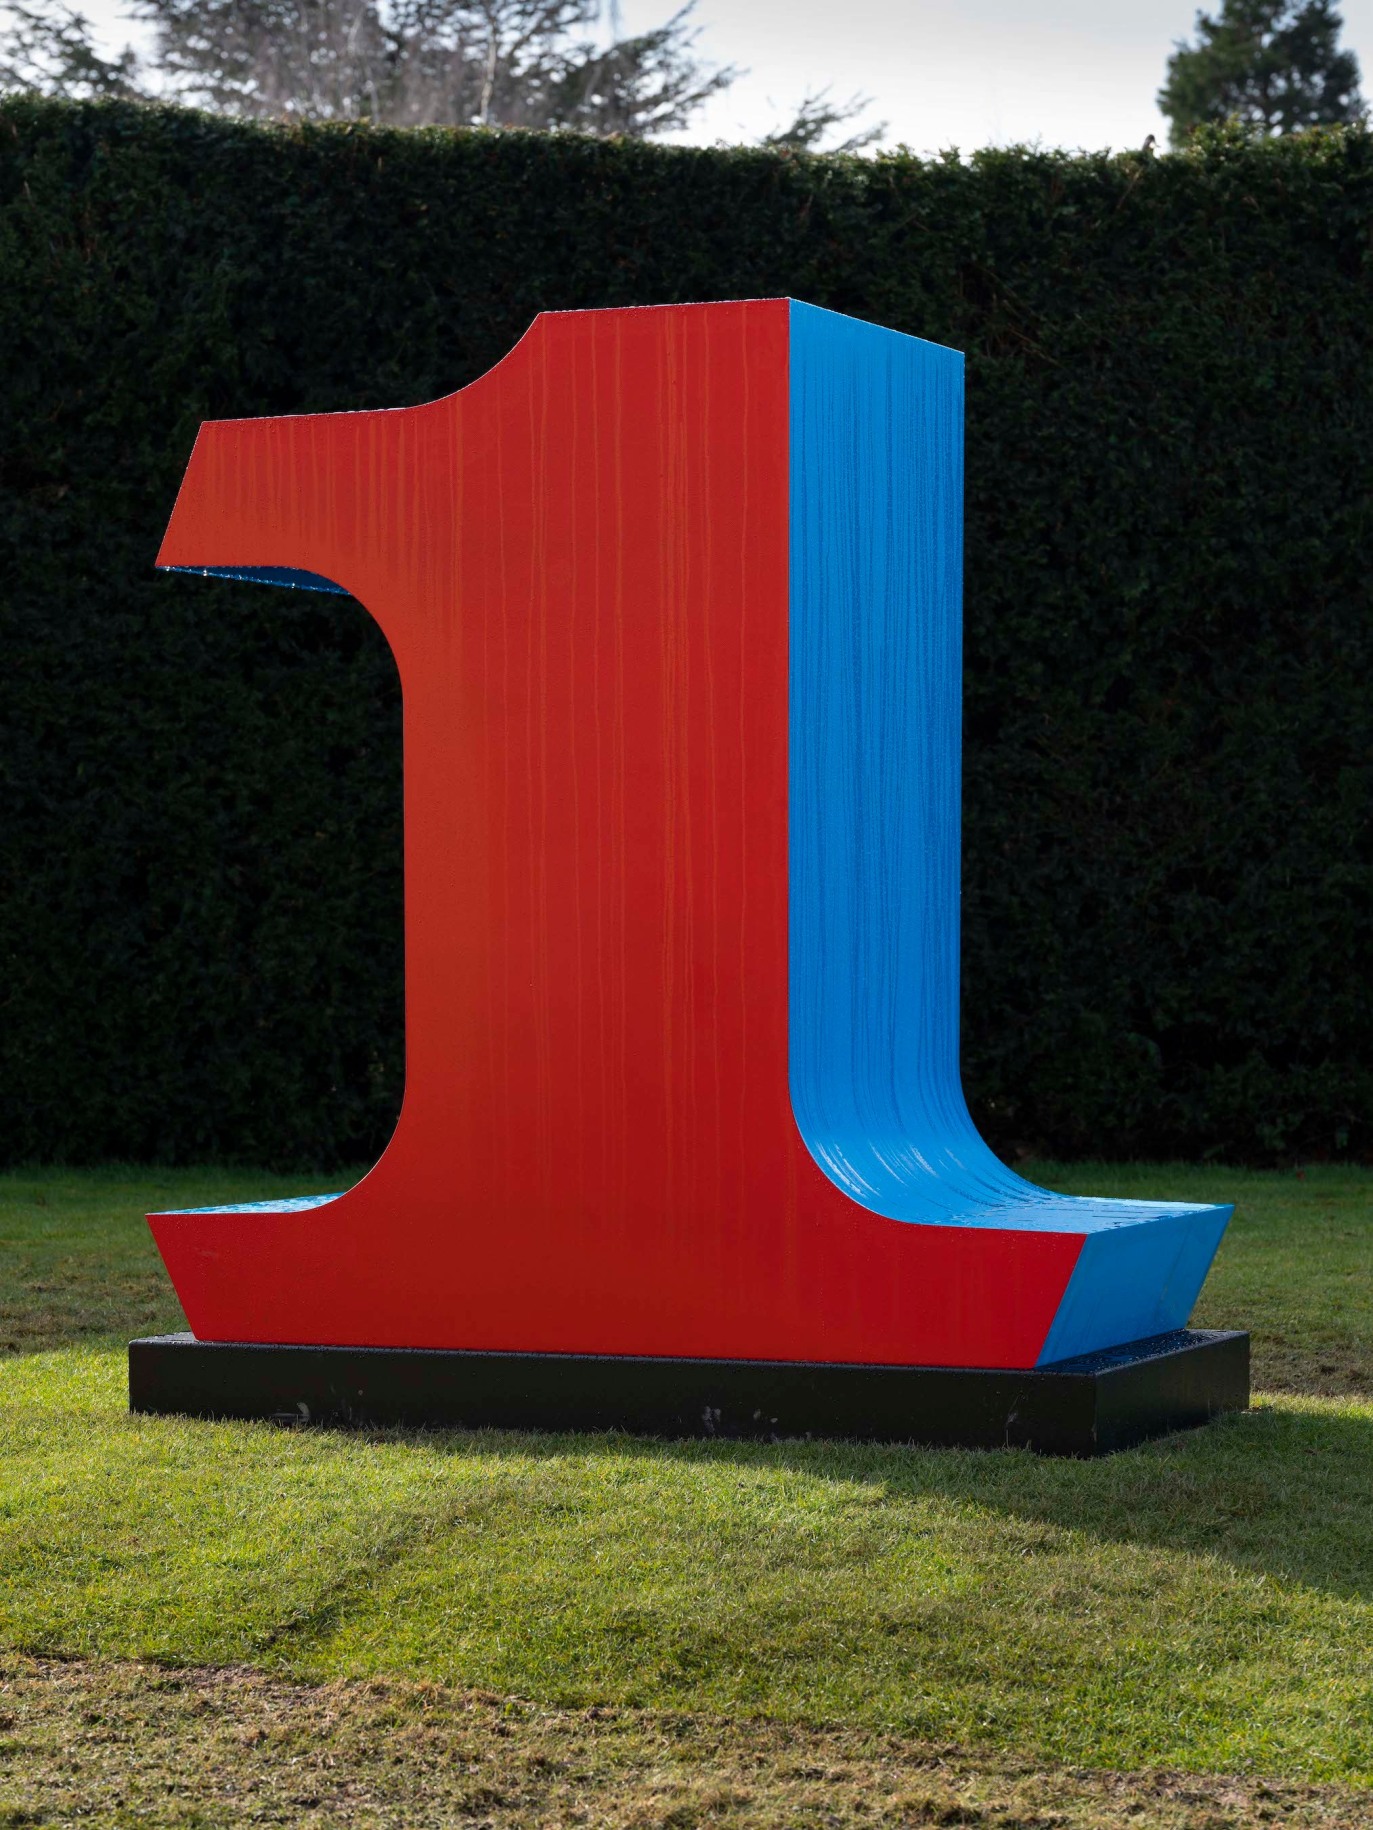 Indiana's red and blue polychrome aluminum sculpture of the number ONE installed at Yorkshire Sculpture Park